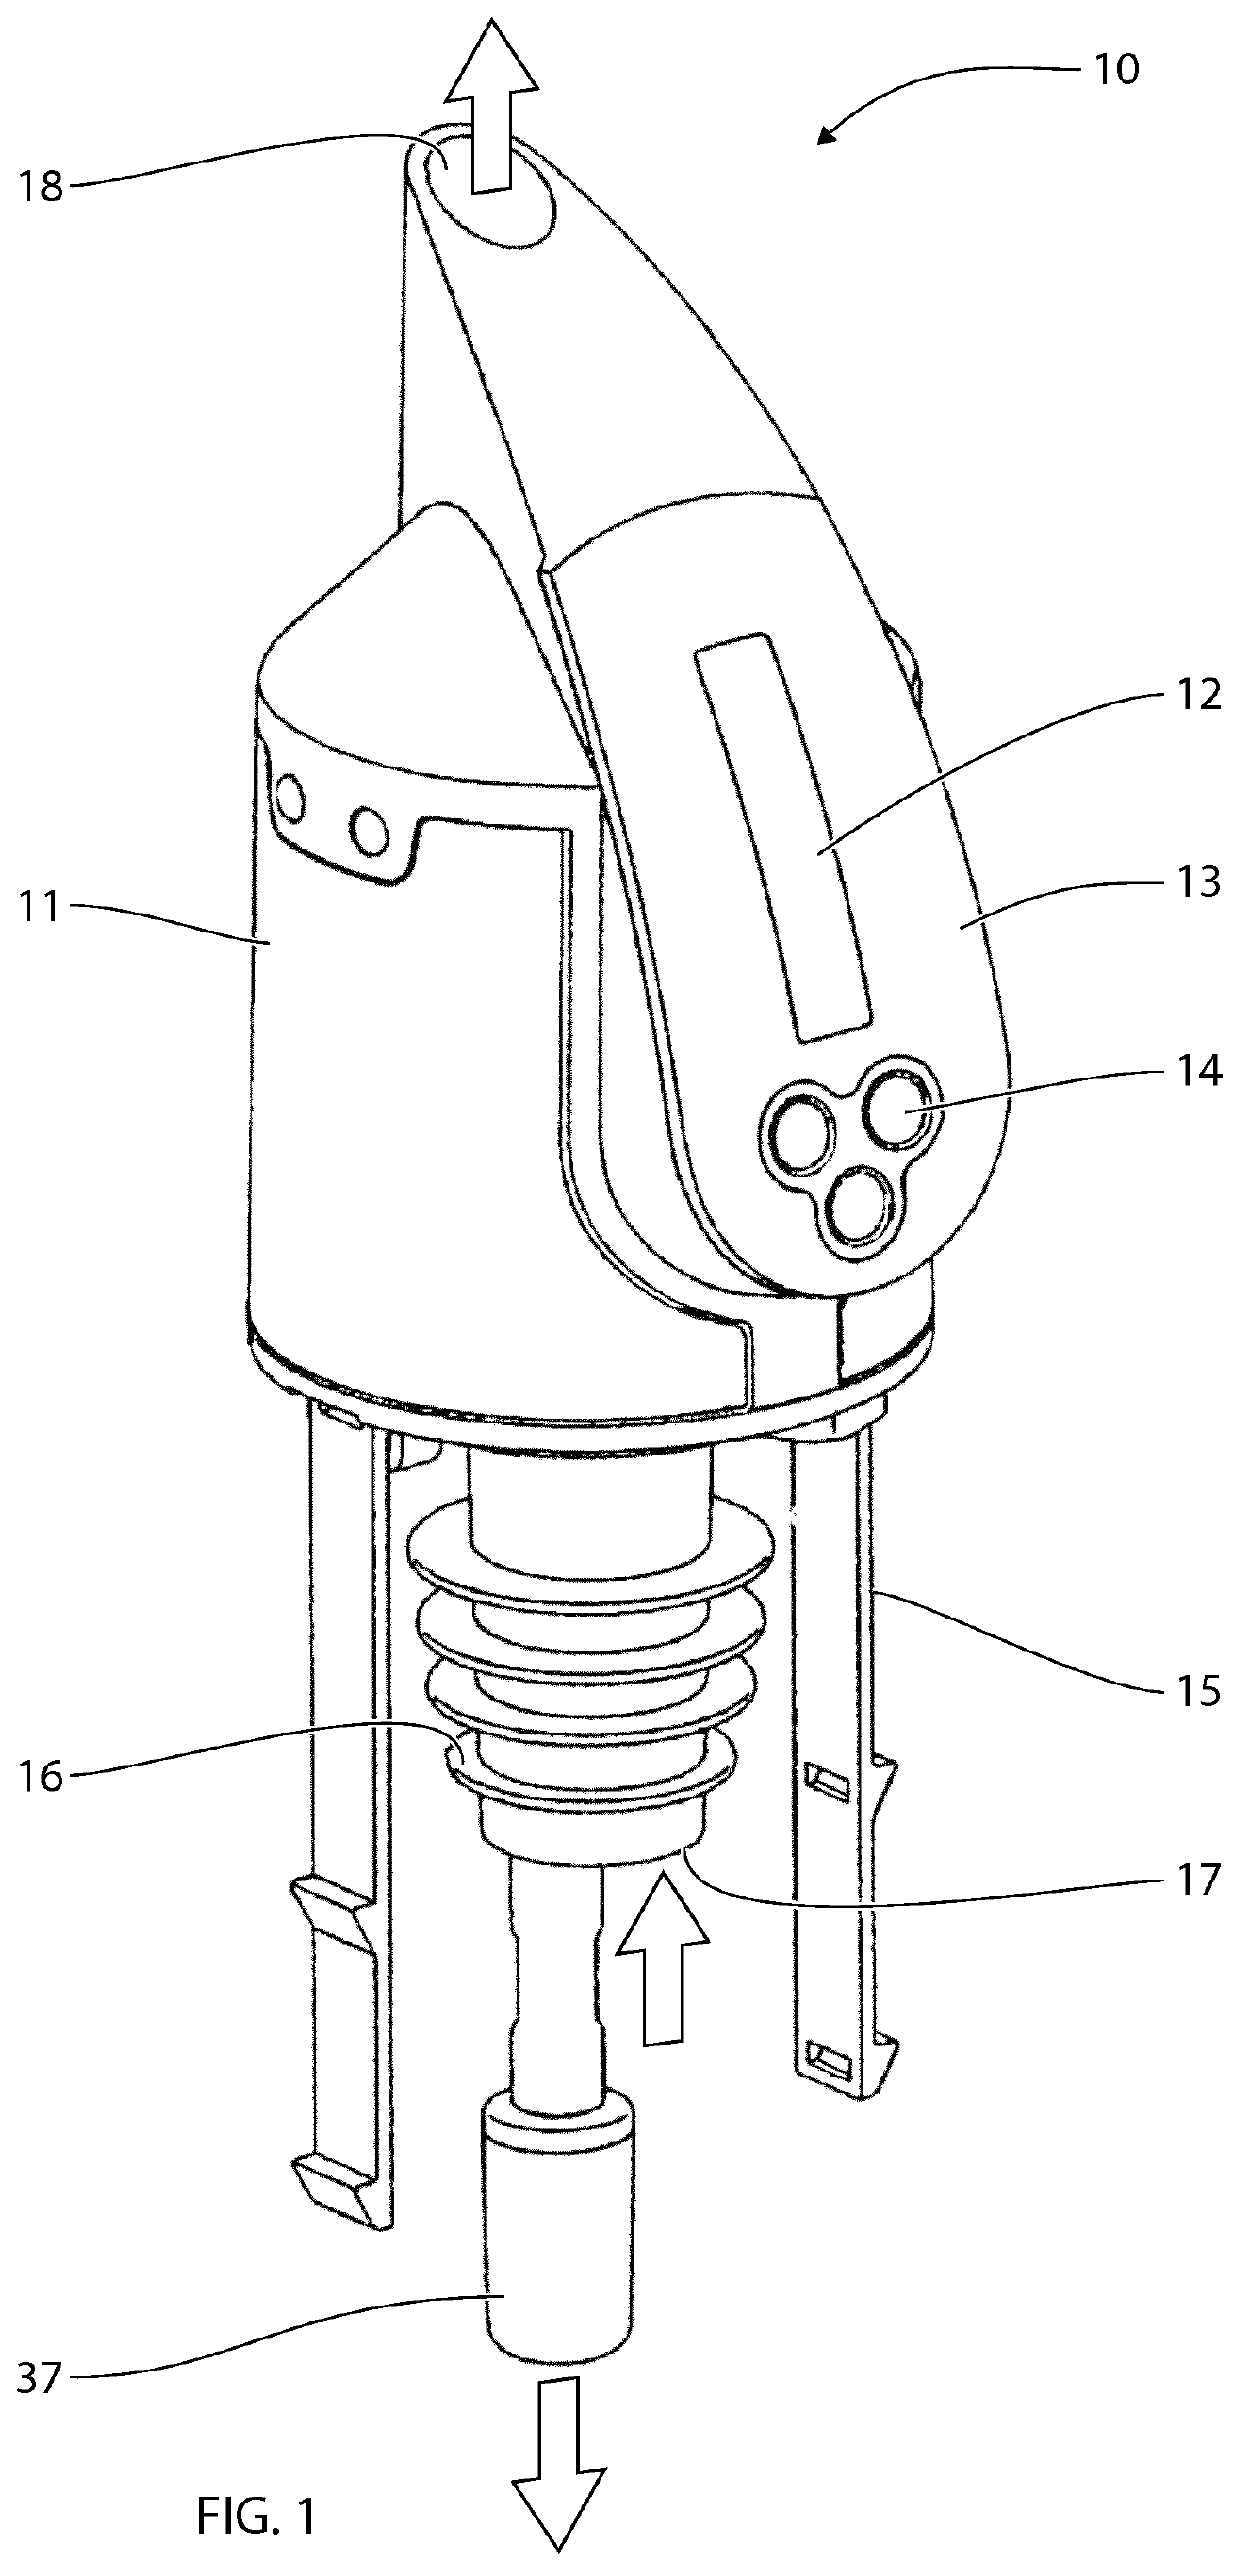 Electronic beverage dosing and pouring spout